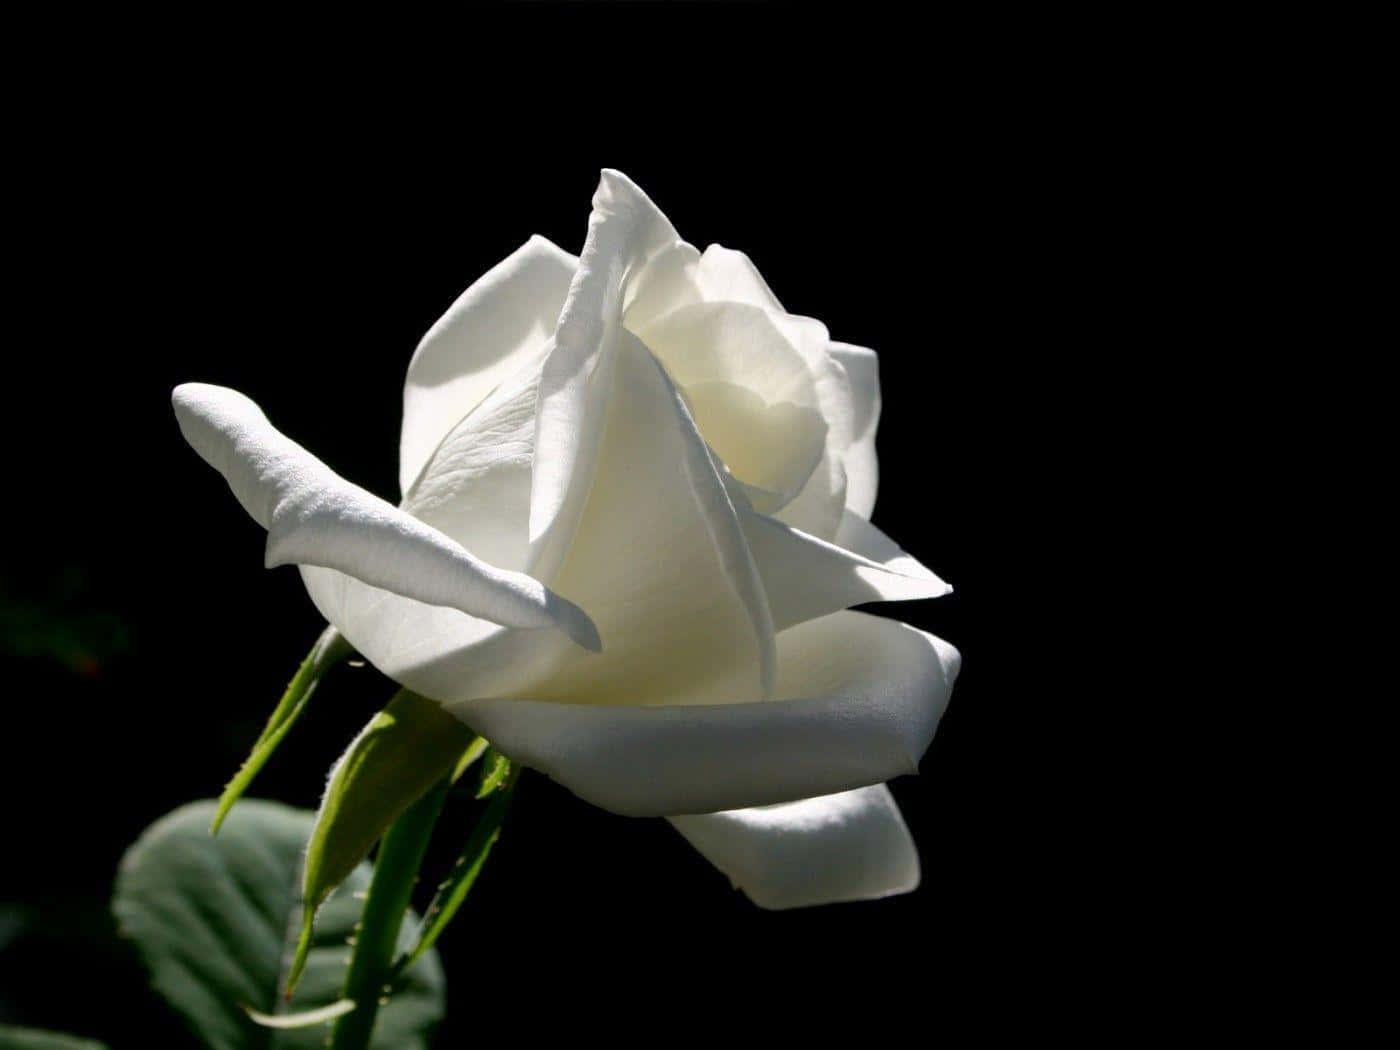 A stunning white rose against a white background.